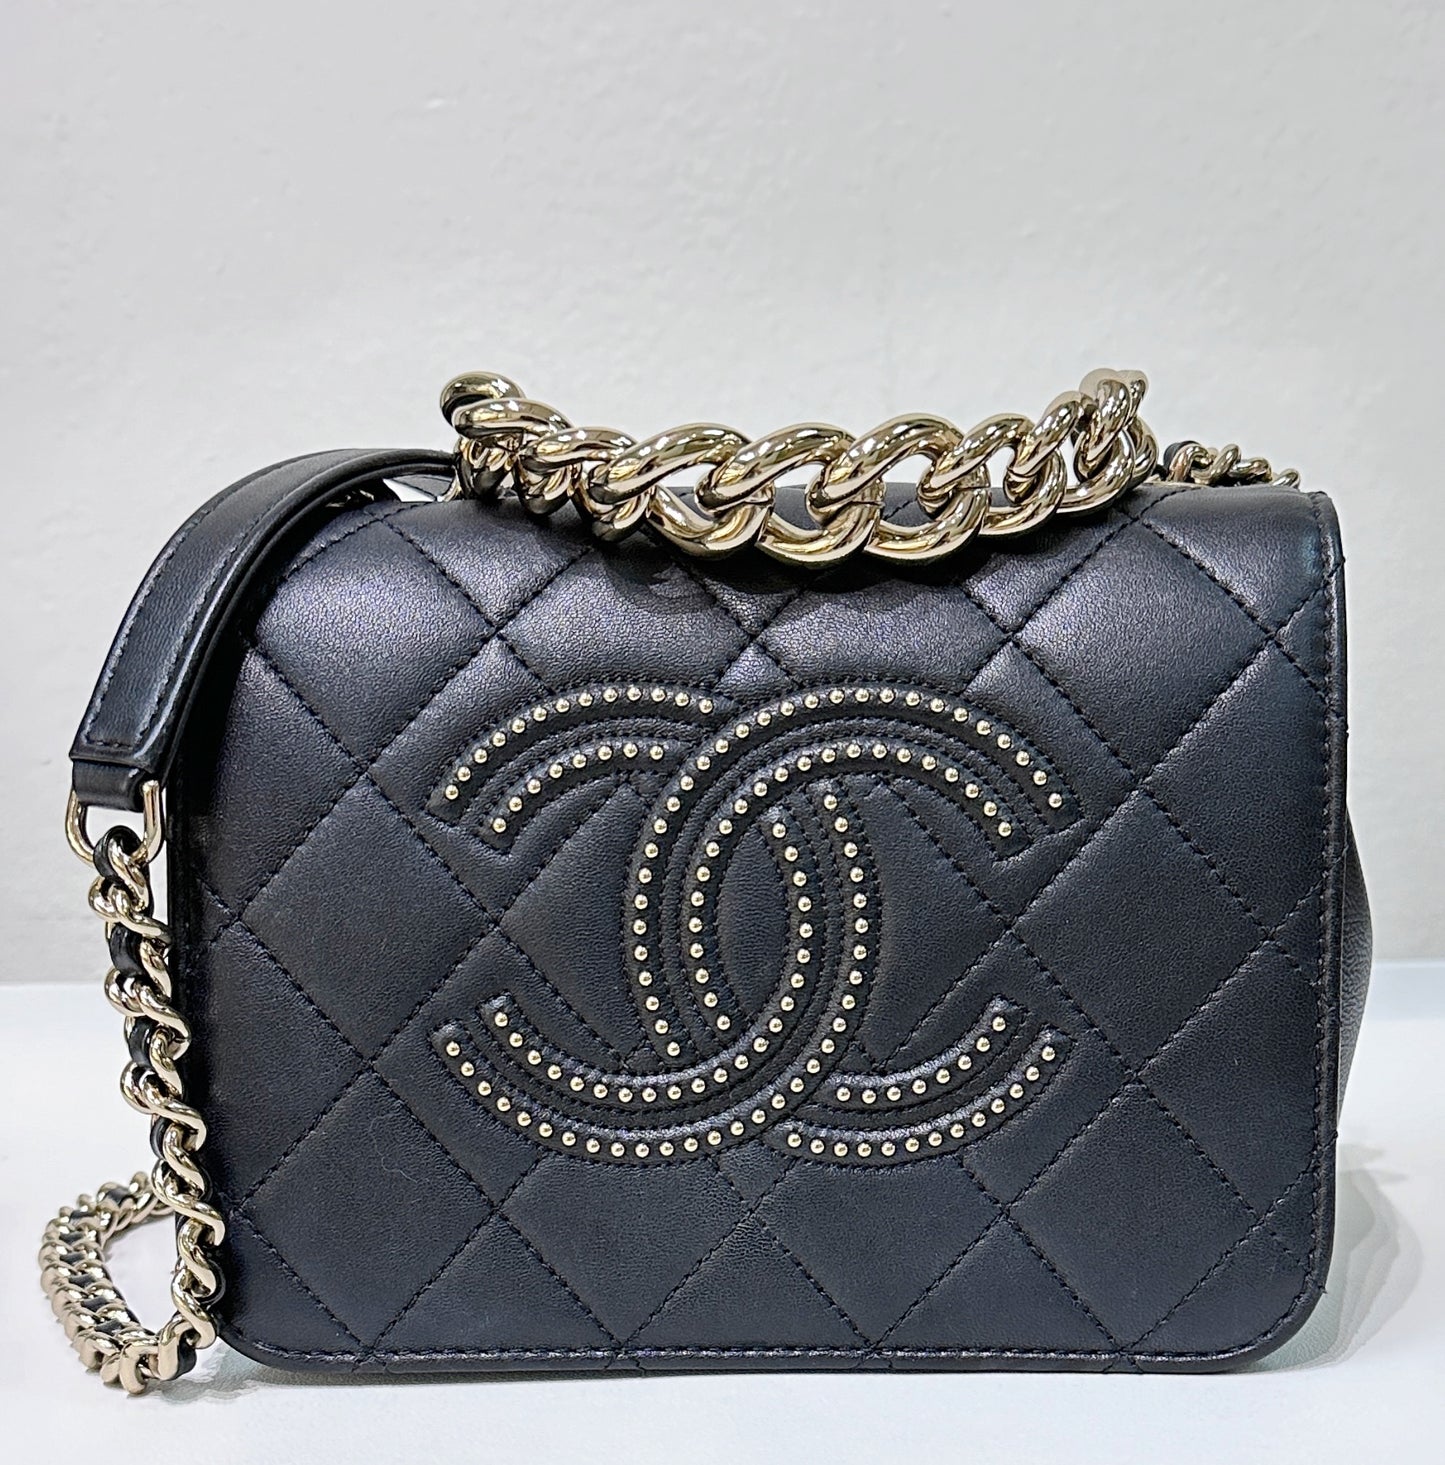 CHANEL Lambskin Quilted Studded Beauty Begins Flap Black